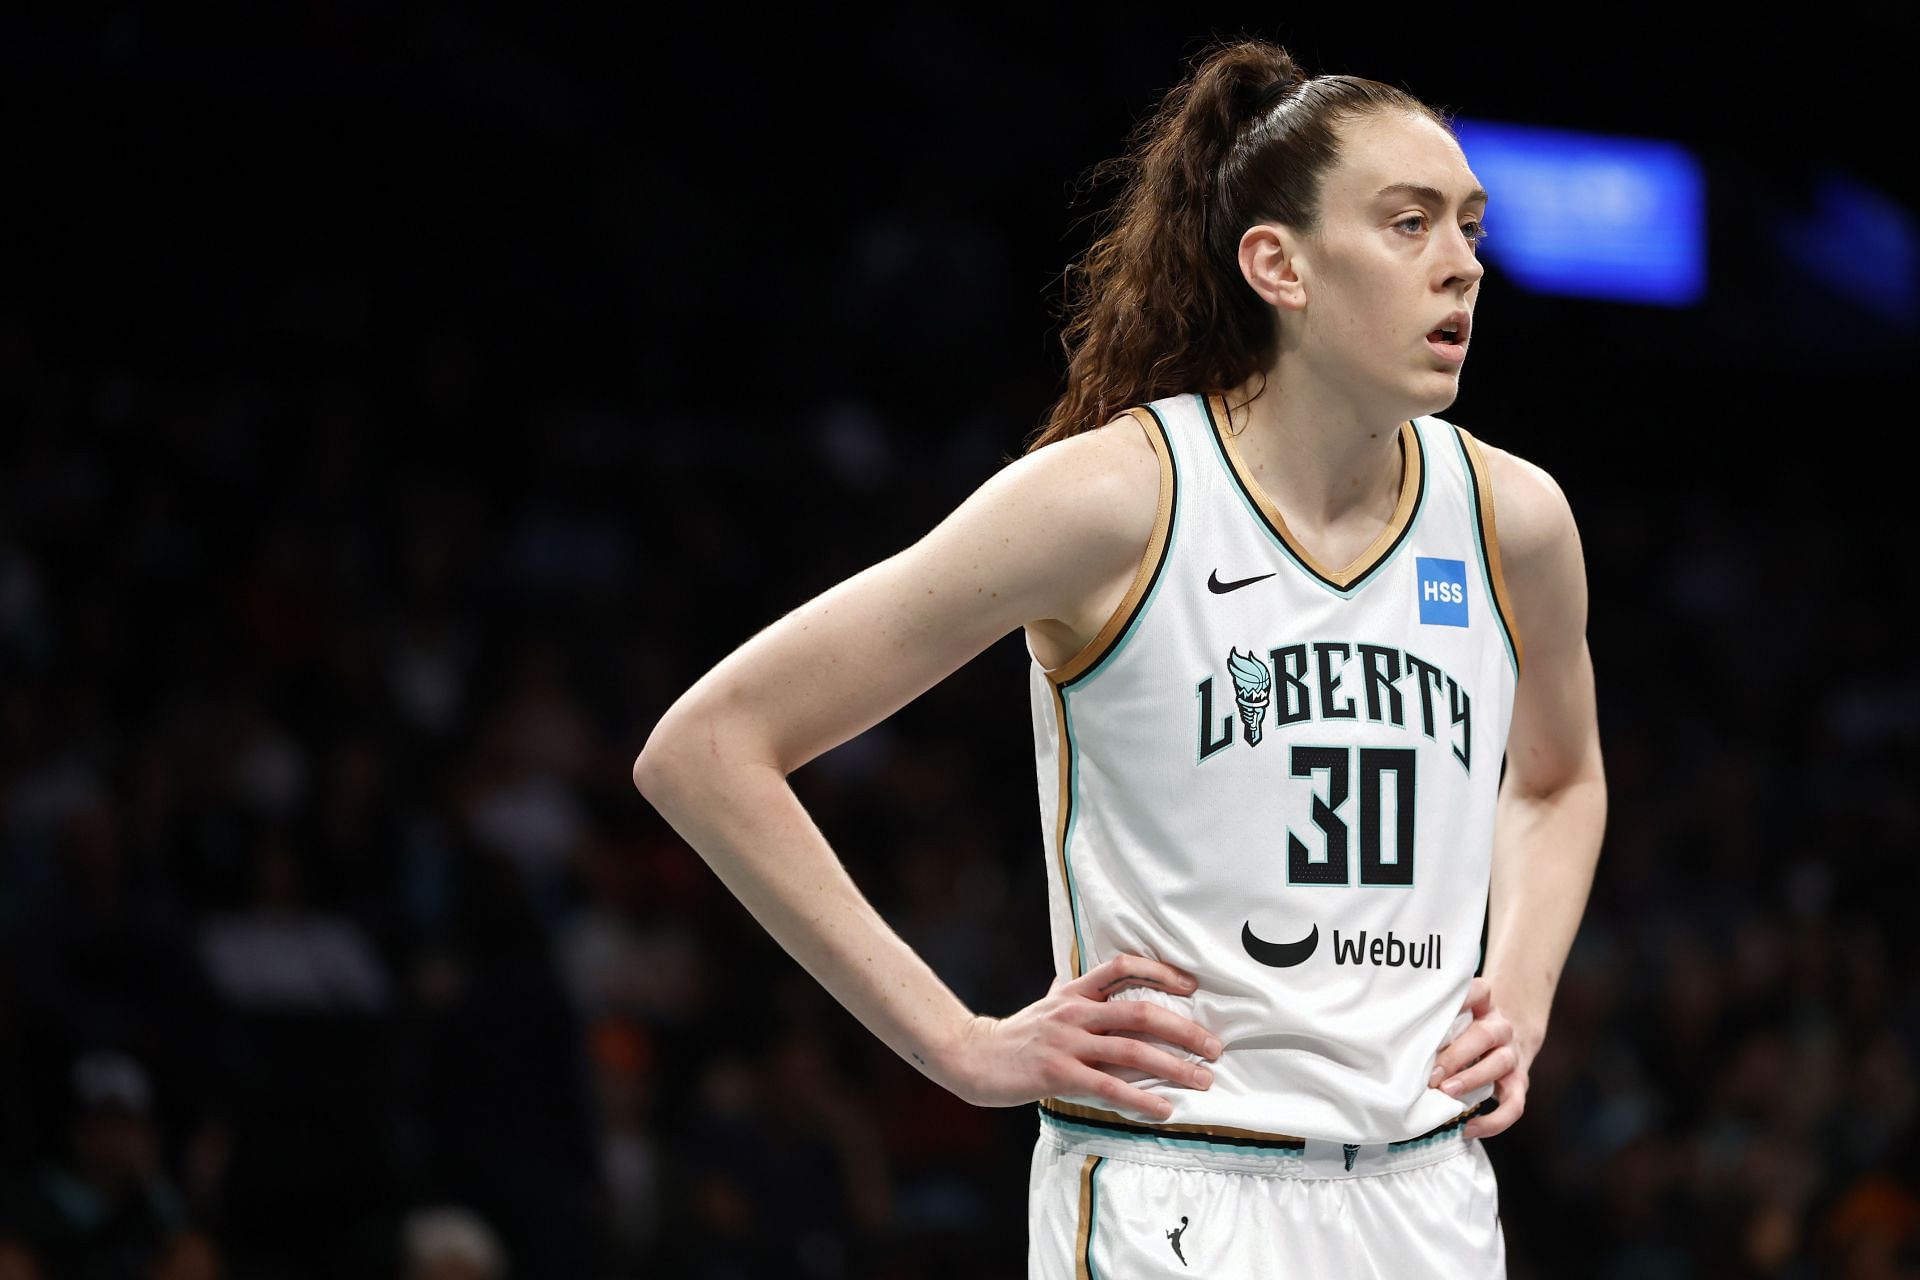 The New York Liberty vs Atlanta Dream matchup will feature one of the best WNBA scorers (Image via Getty Images)